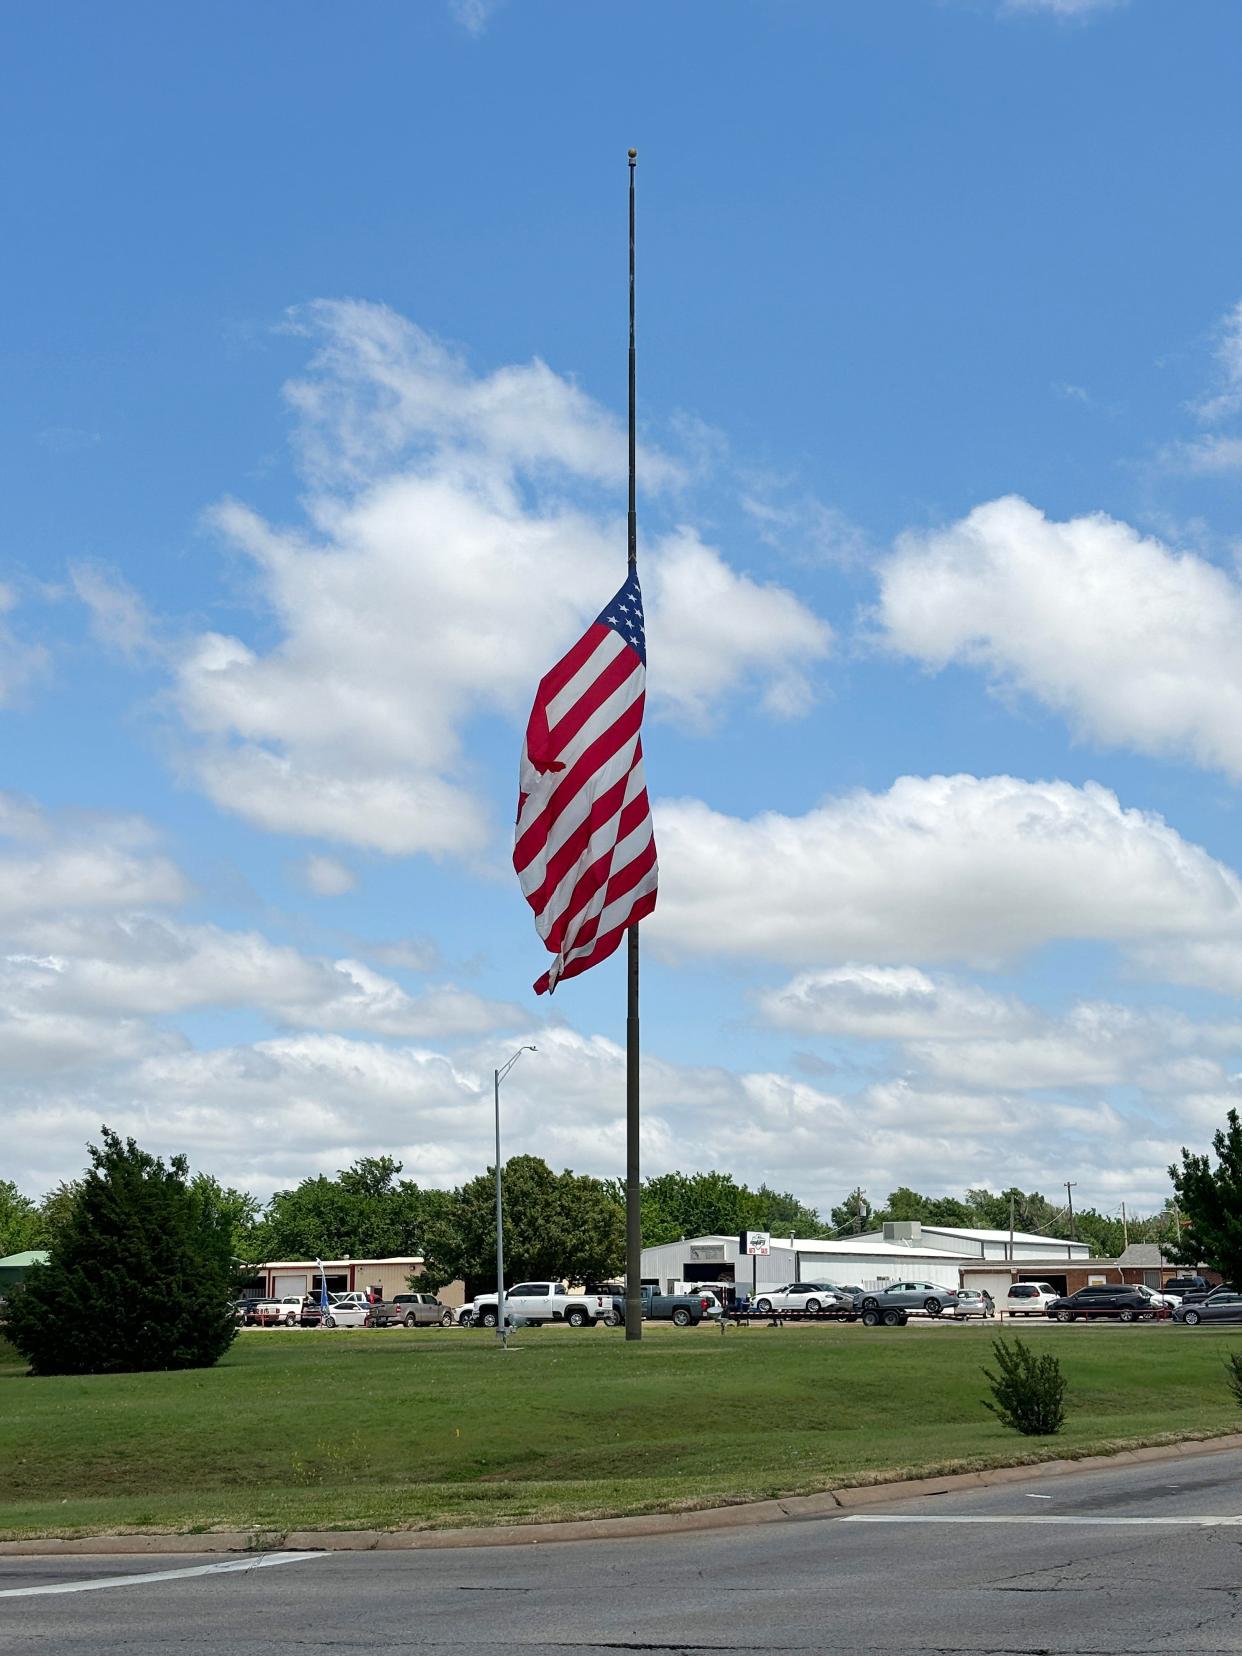 A flag in Moore flies at half-staff Friday in honor of longtime Moore Mayor, Glenn Lewis, whose funeral was on the 25th anniversary of the May 3, 1999, tornado that hit Moore.